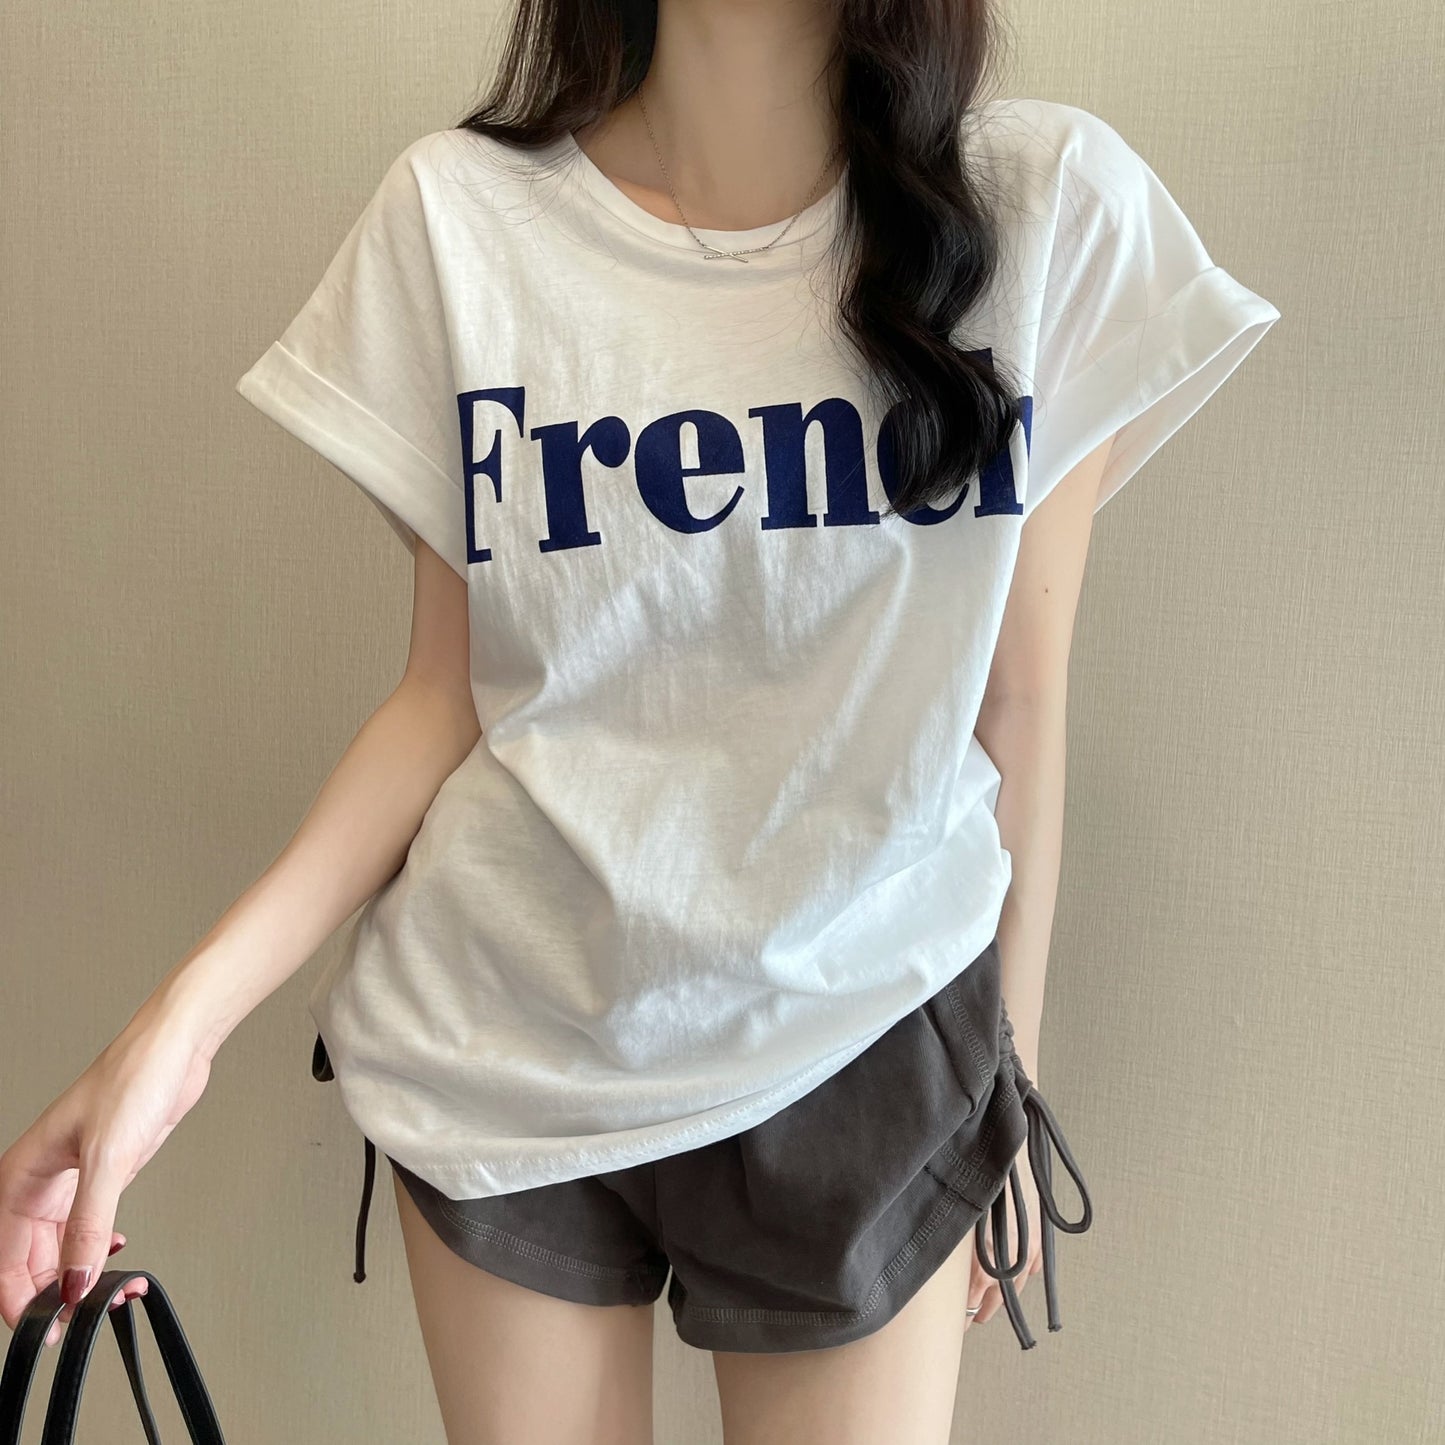 Korean printed "FRENCH" T-Shirt (Shipping not included)